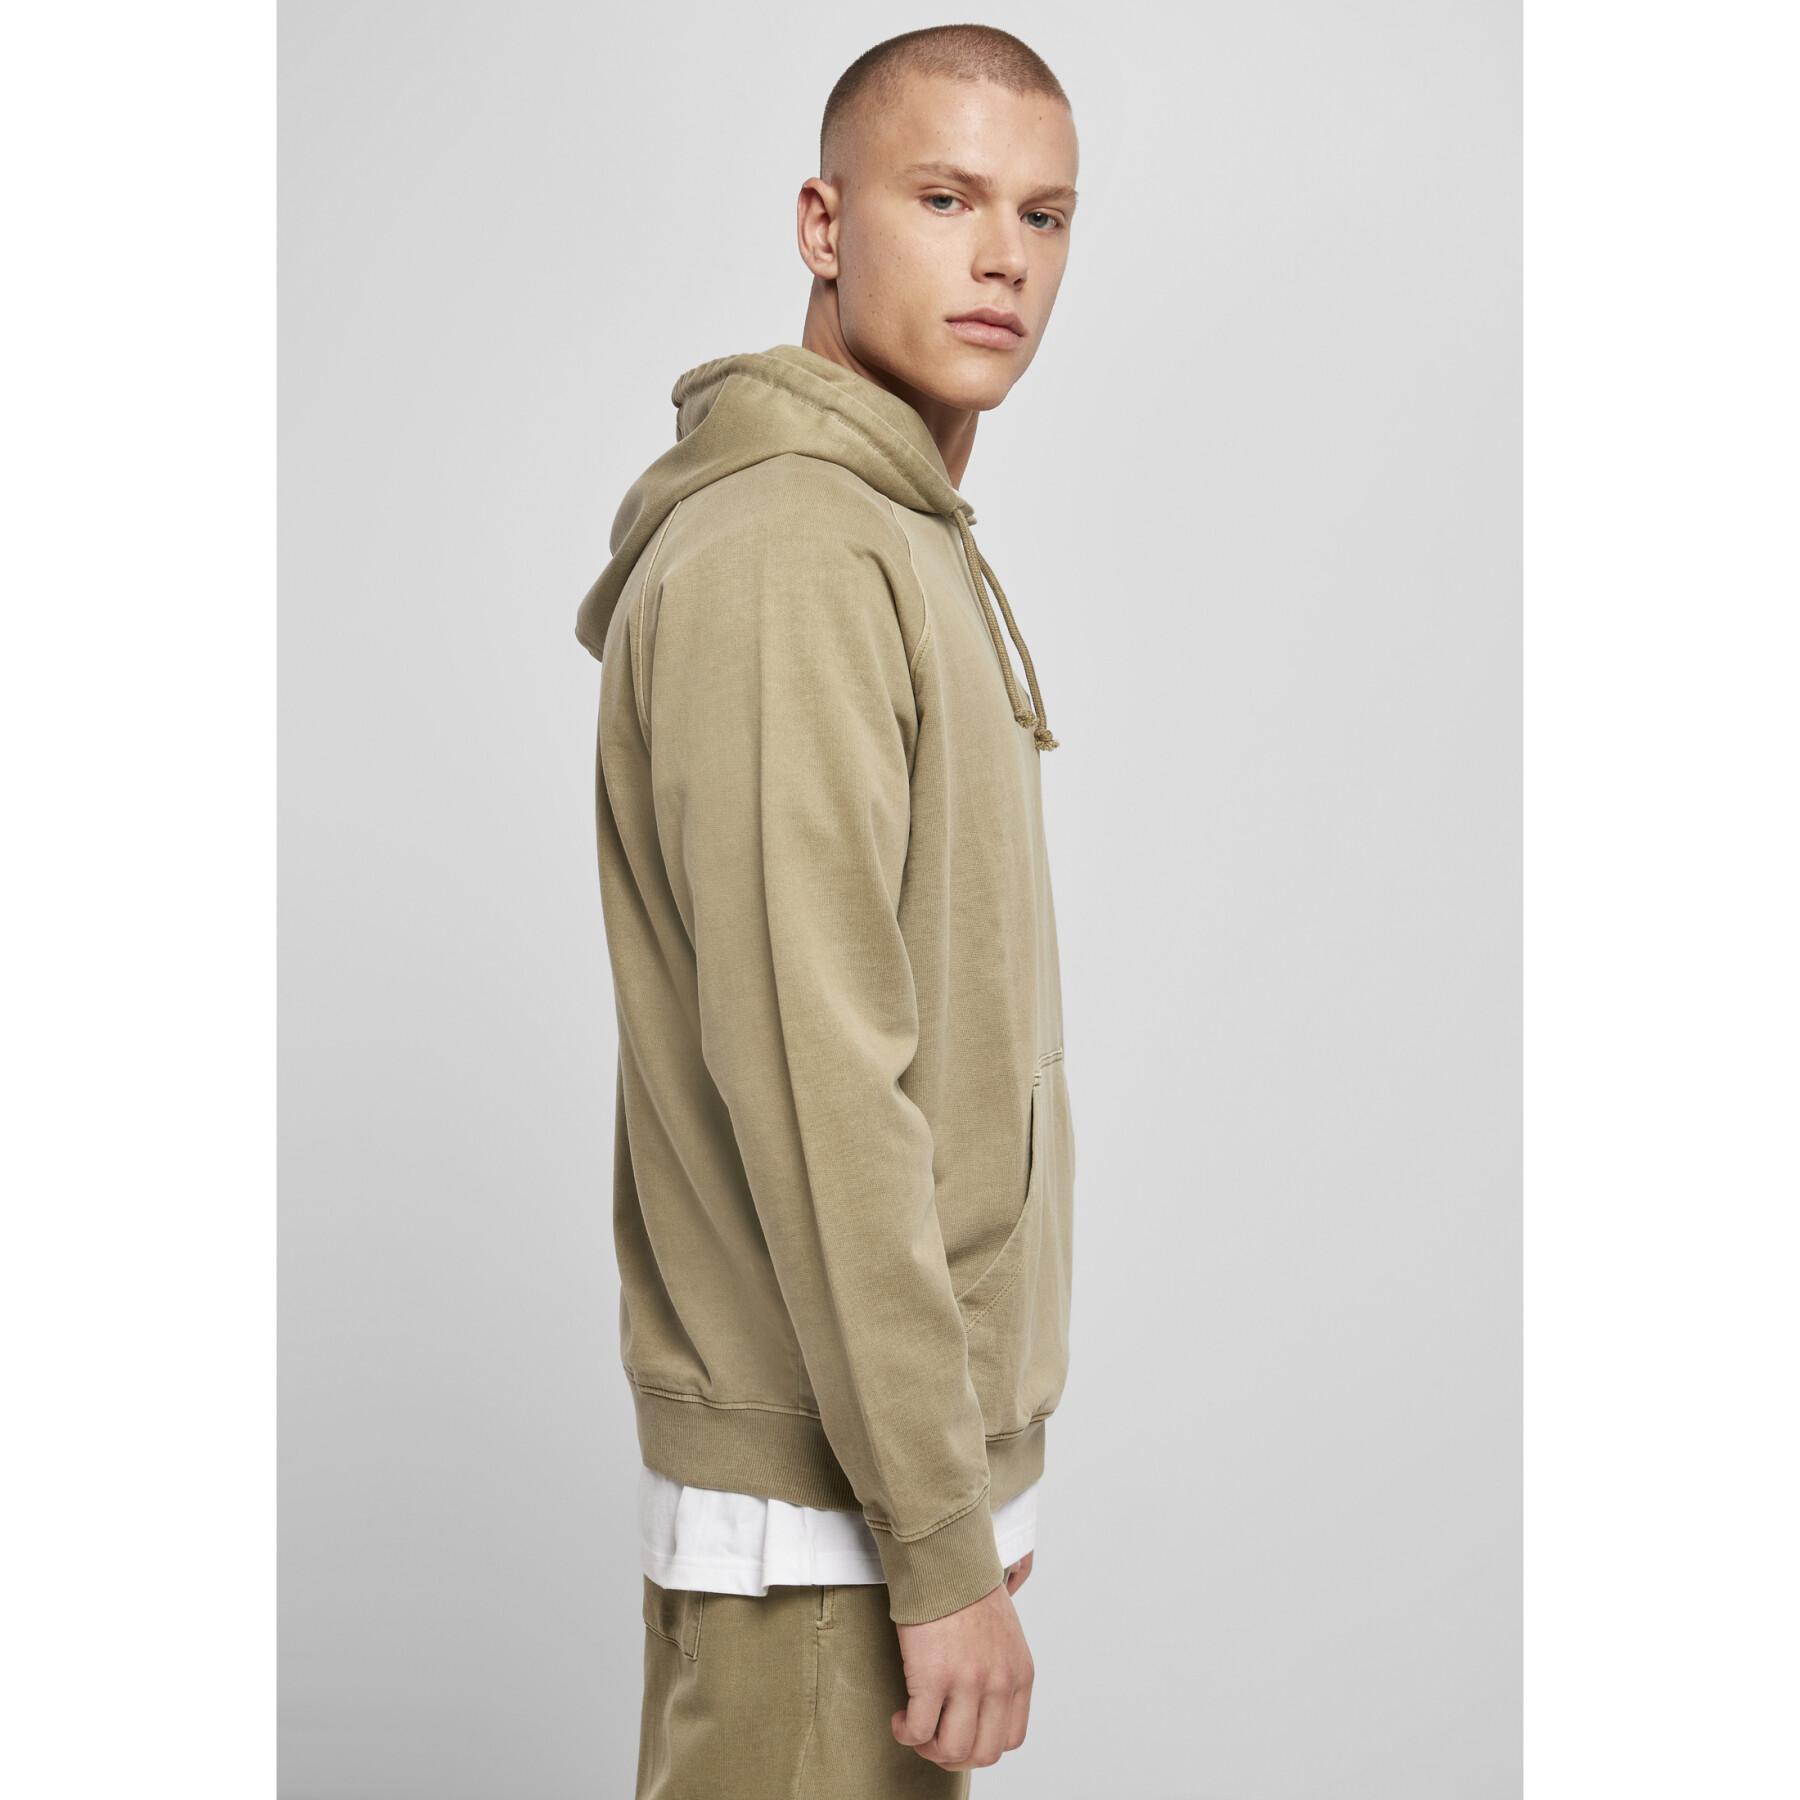 Hoodie Urban Classics overdyed (Grandes tailles)